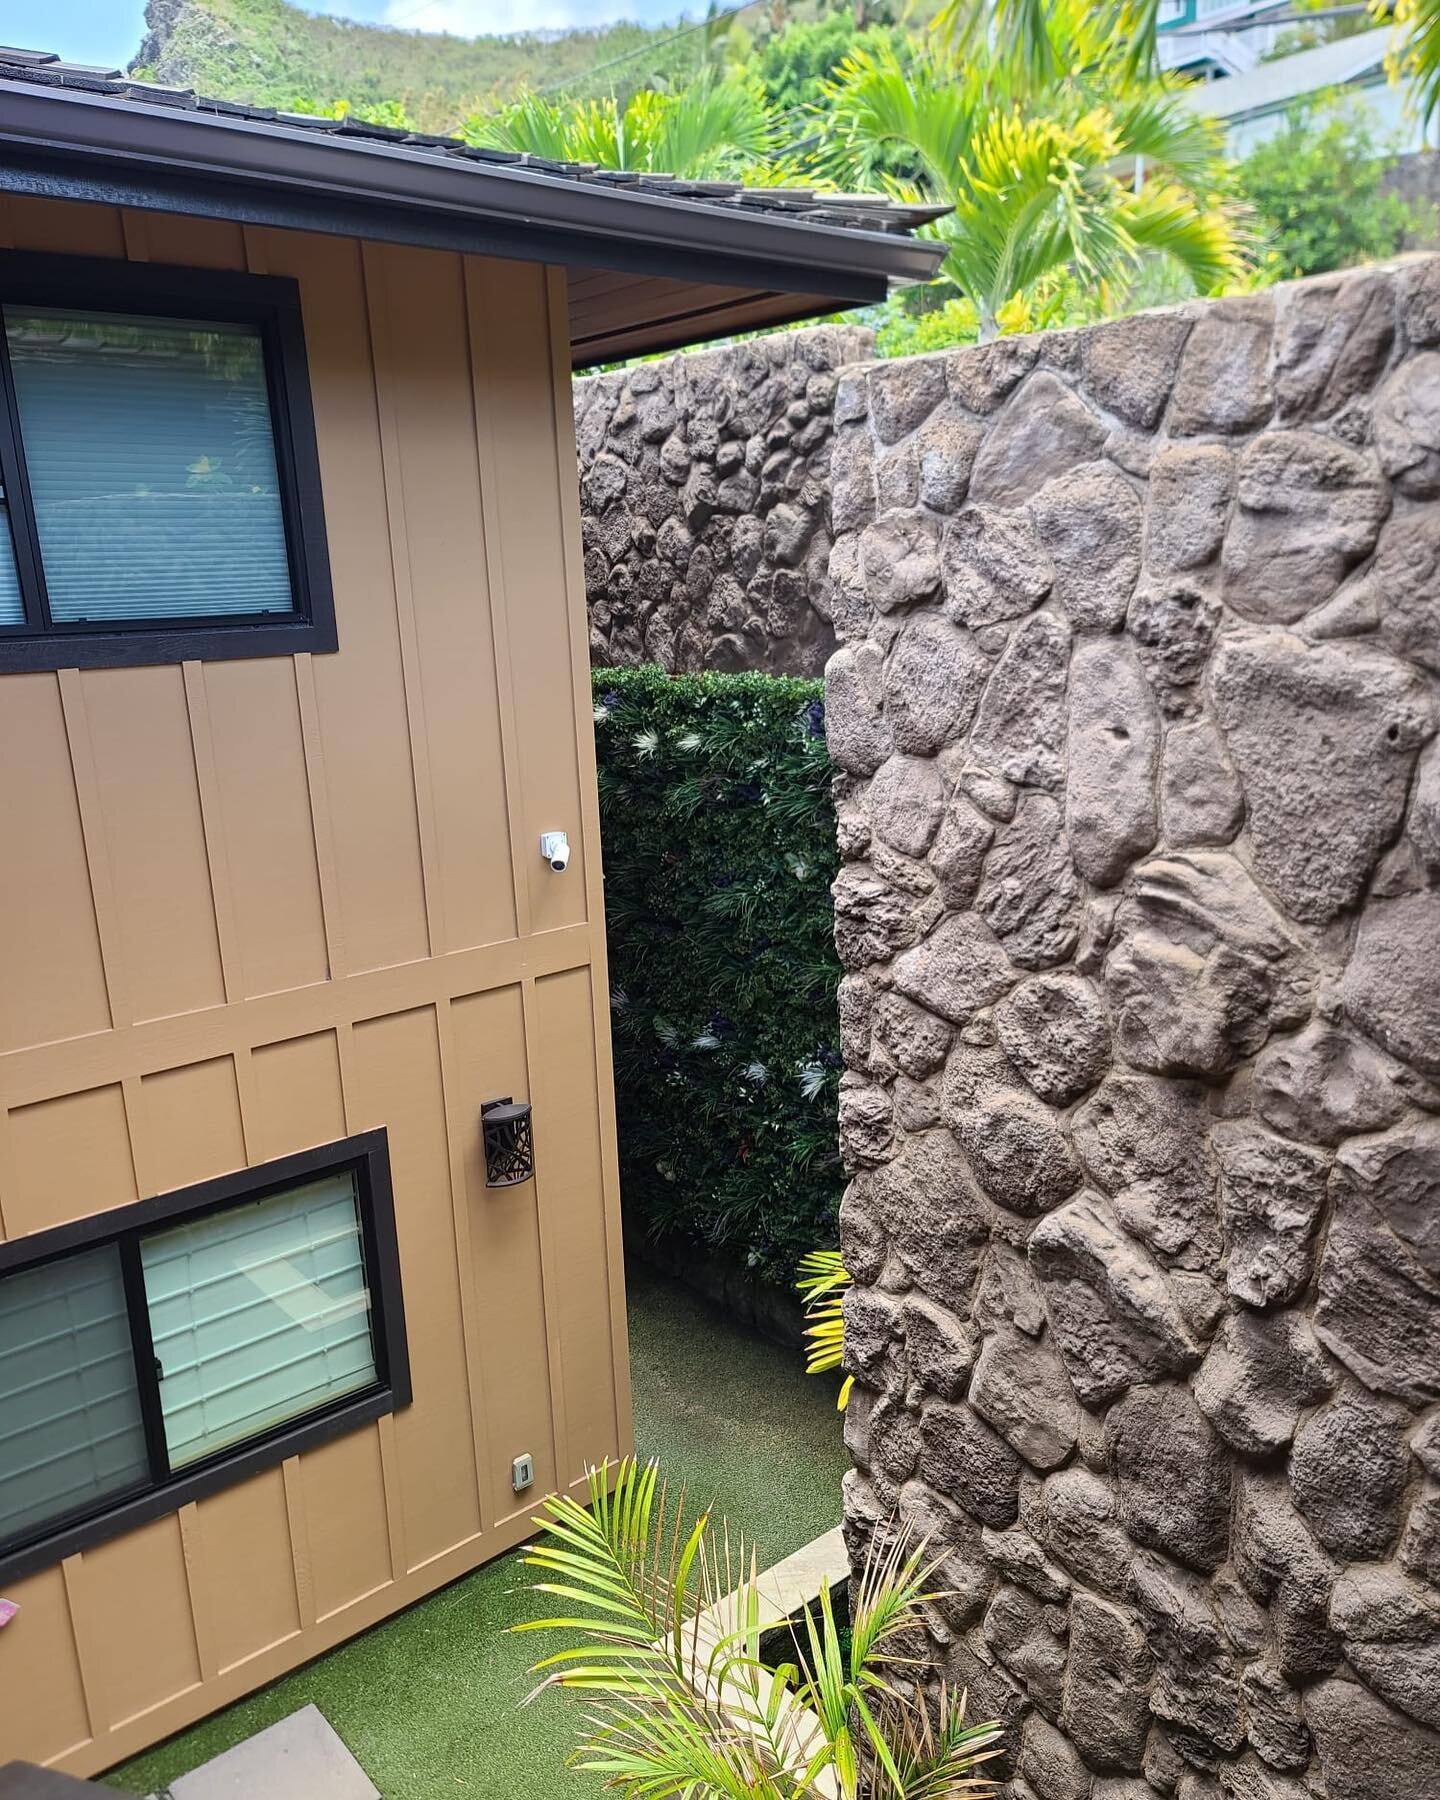 New installation on the windward side, give us a call if you have a dull area you wish to brighten up 💐#calicogreens #artificialgreenwall 
#SYNlawnOahu #Hawaiilandscaping #SyntheticTurf #ArtificialGrass #SynLawn #lifetimewarranty #biobasedproducts #